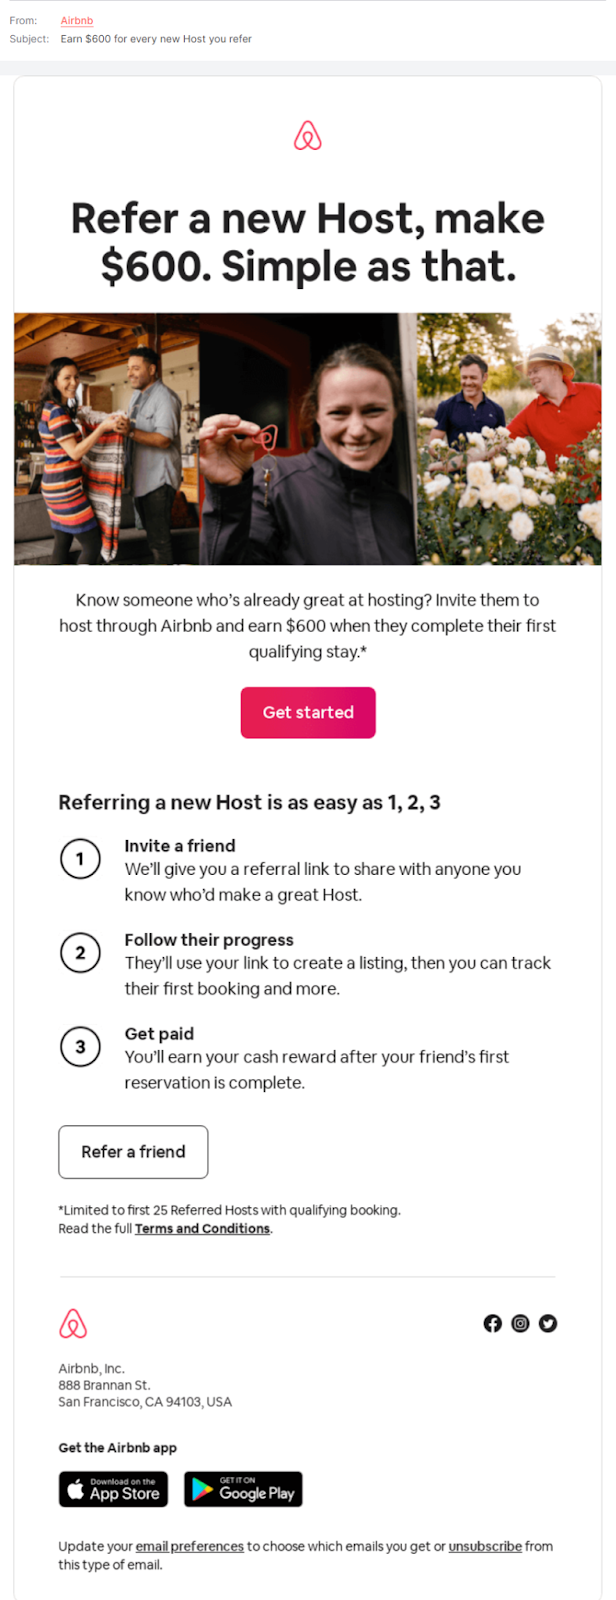 An email from Airbnb promoting their referral program